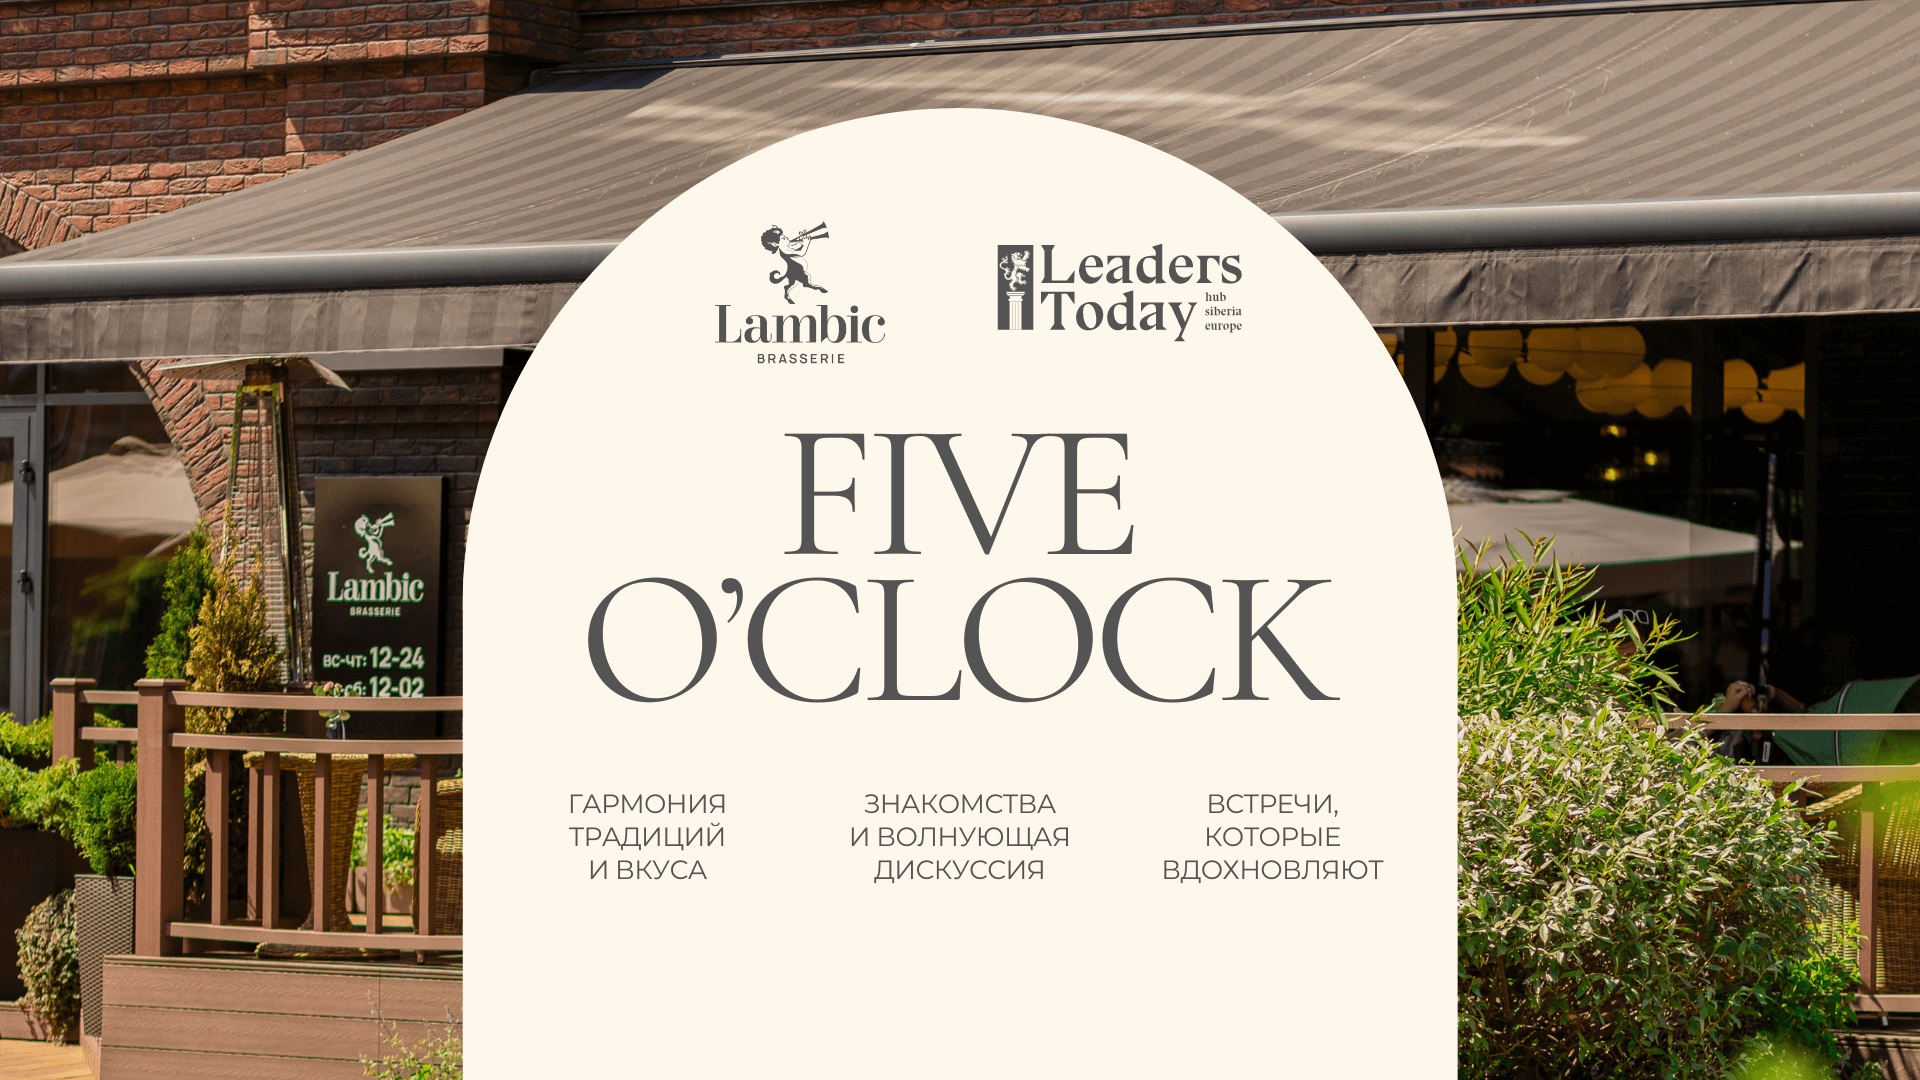 On June 23, Leaders Today's FIVE O'CLOCK with writer Viktor Stasevich was held at Lambic Restaurant